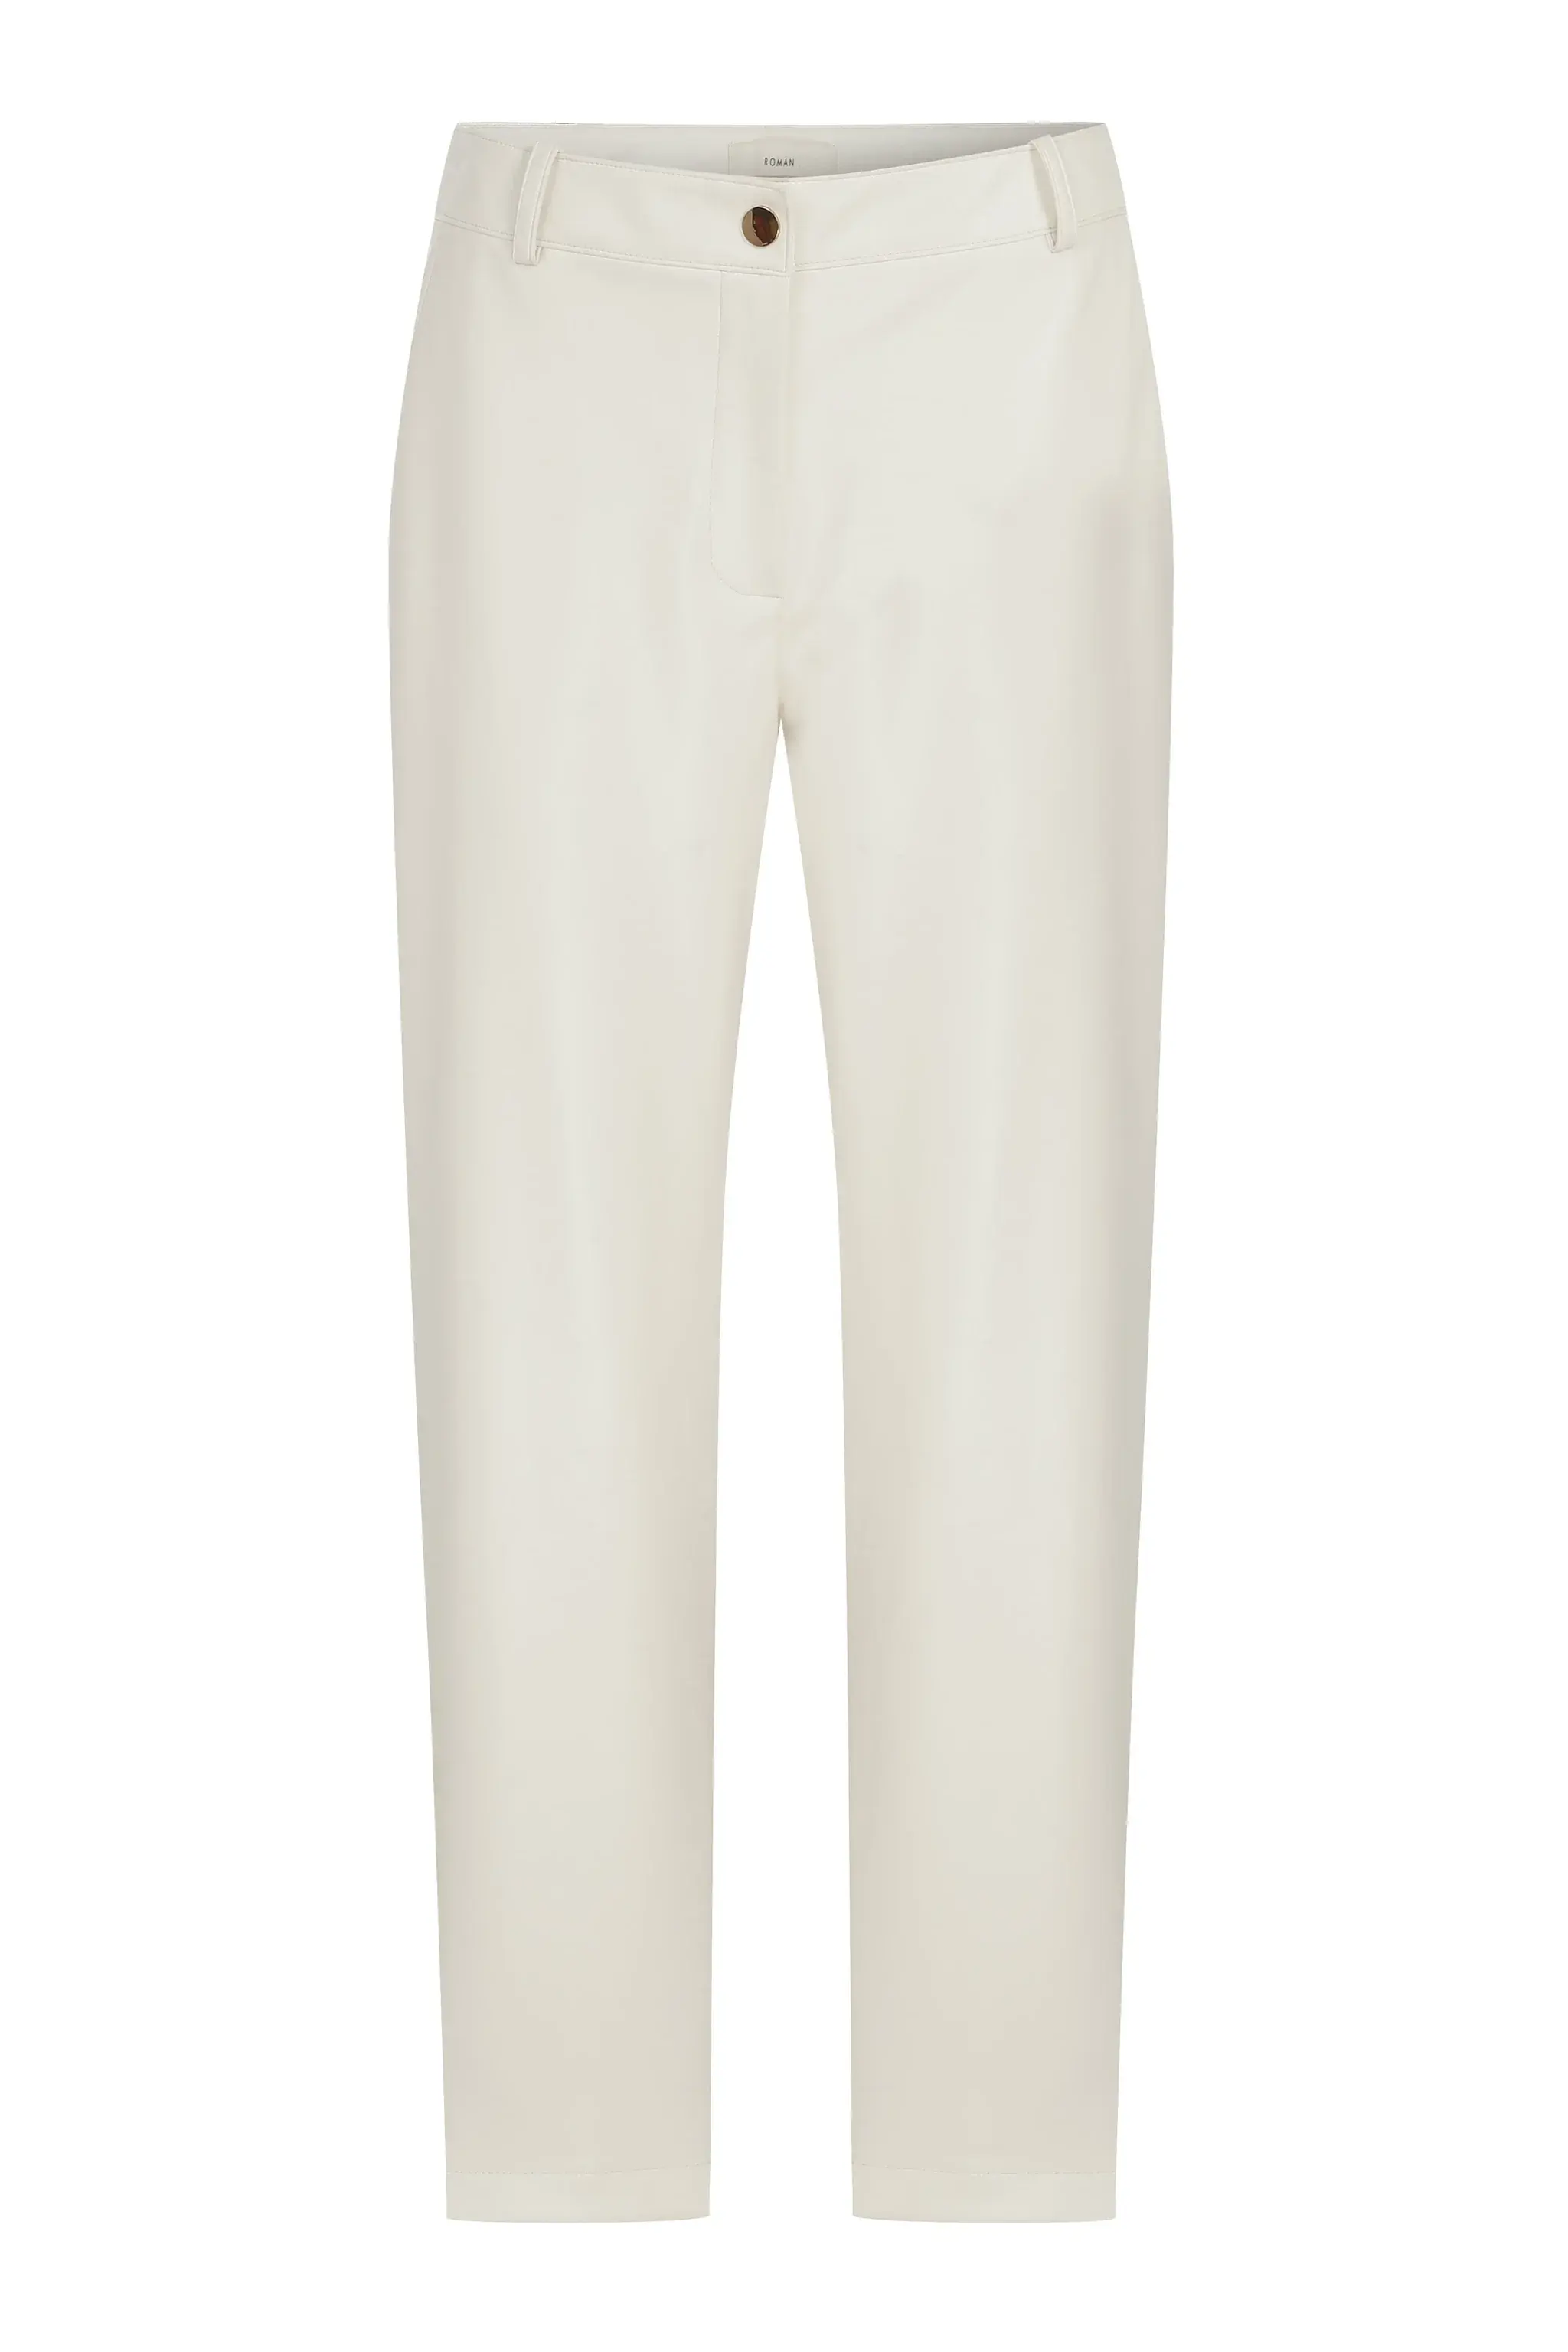 Roman Leather Look Women's Trousers - 4 / White. 1